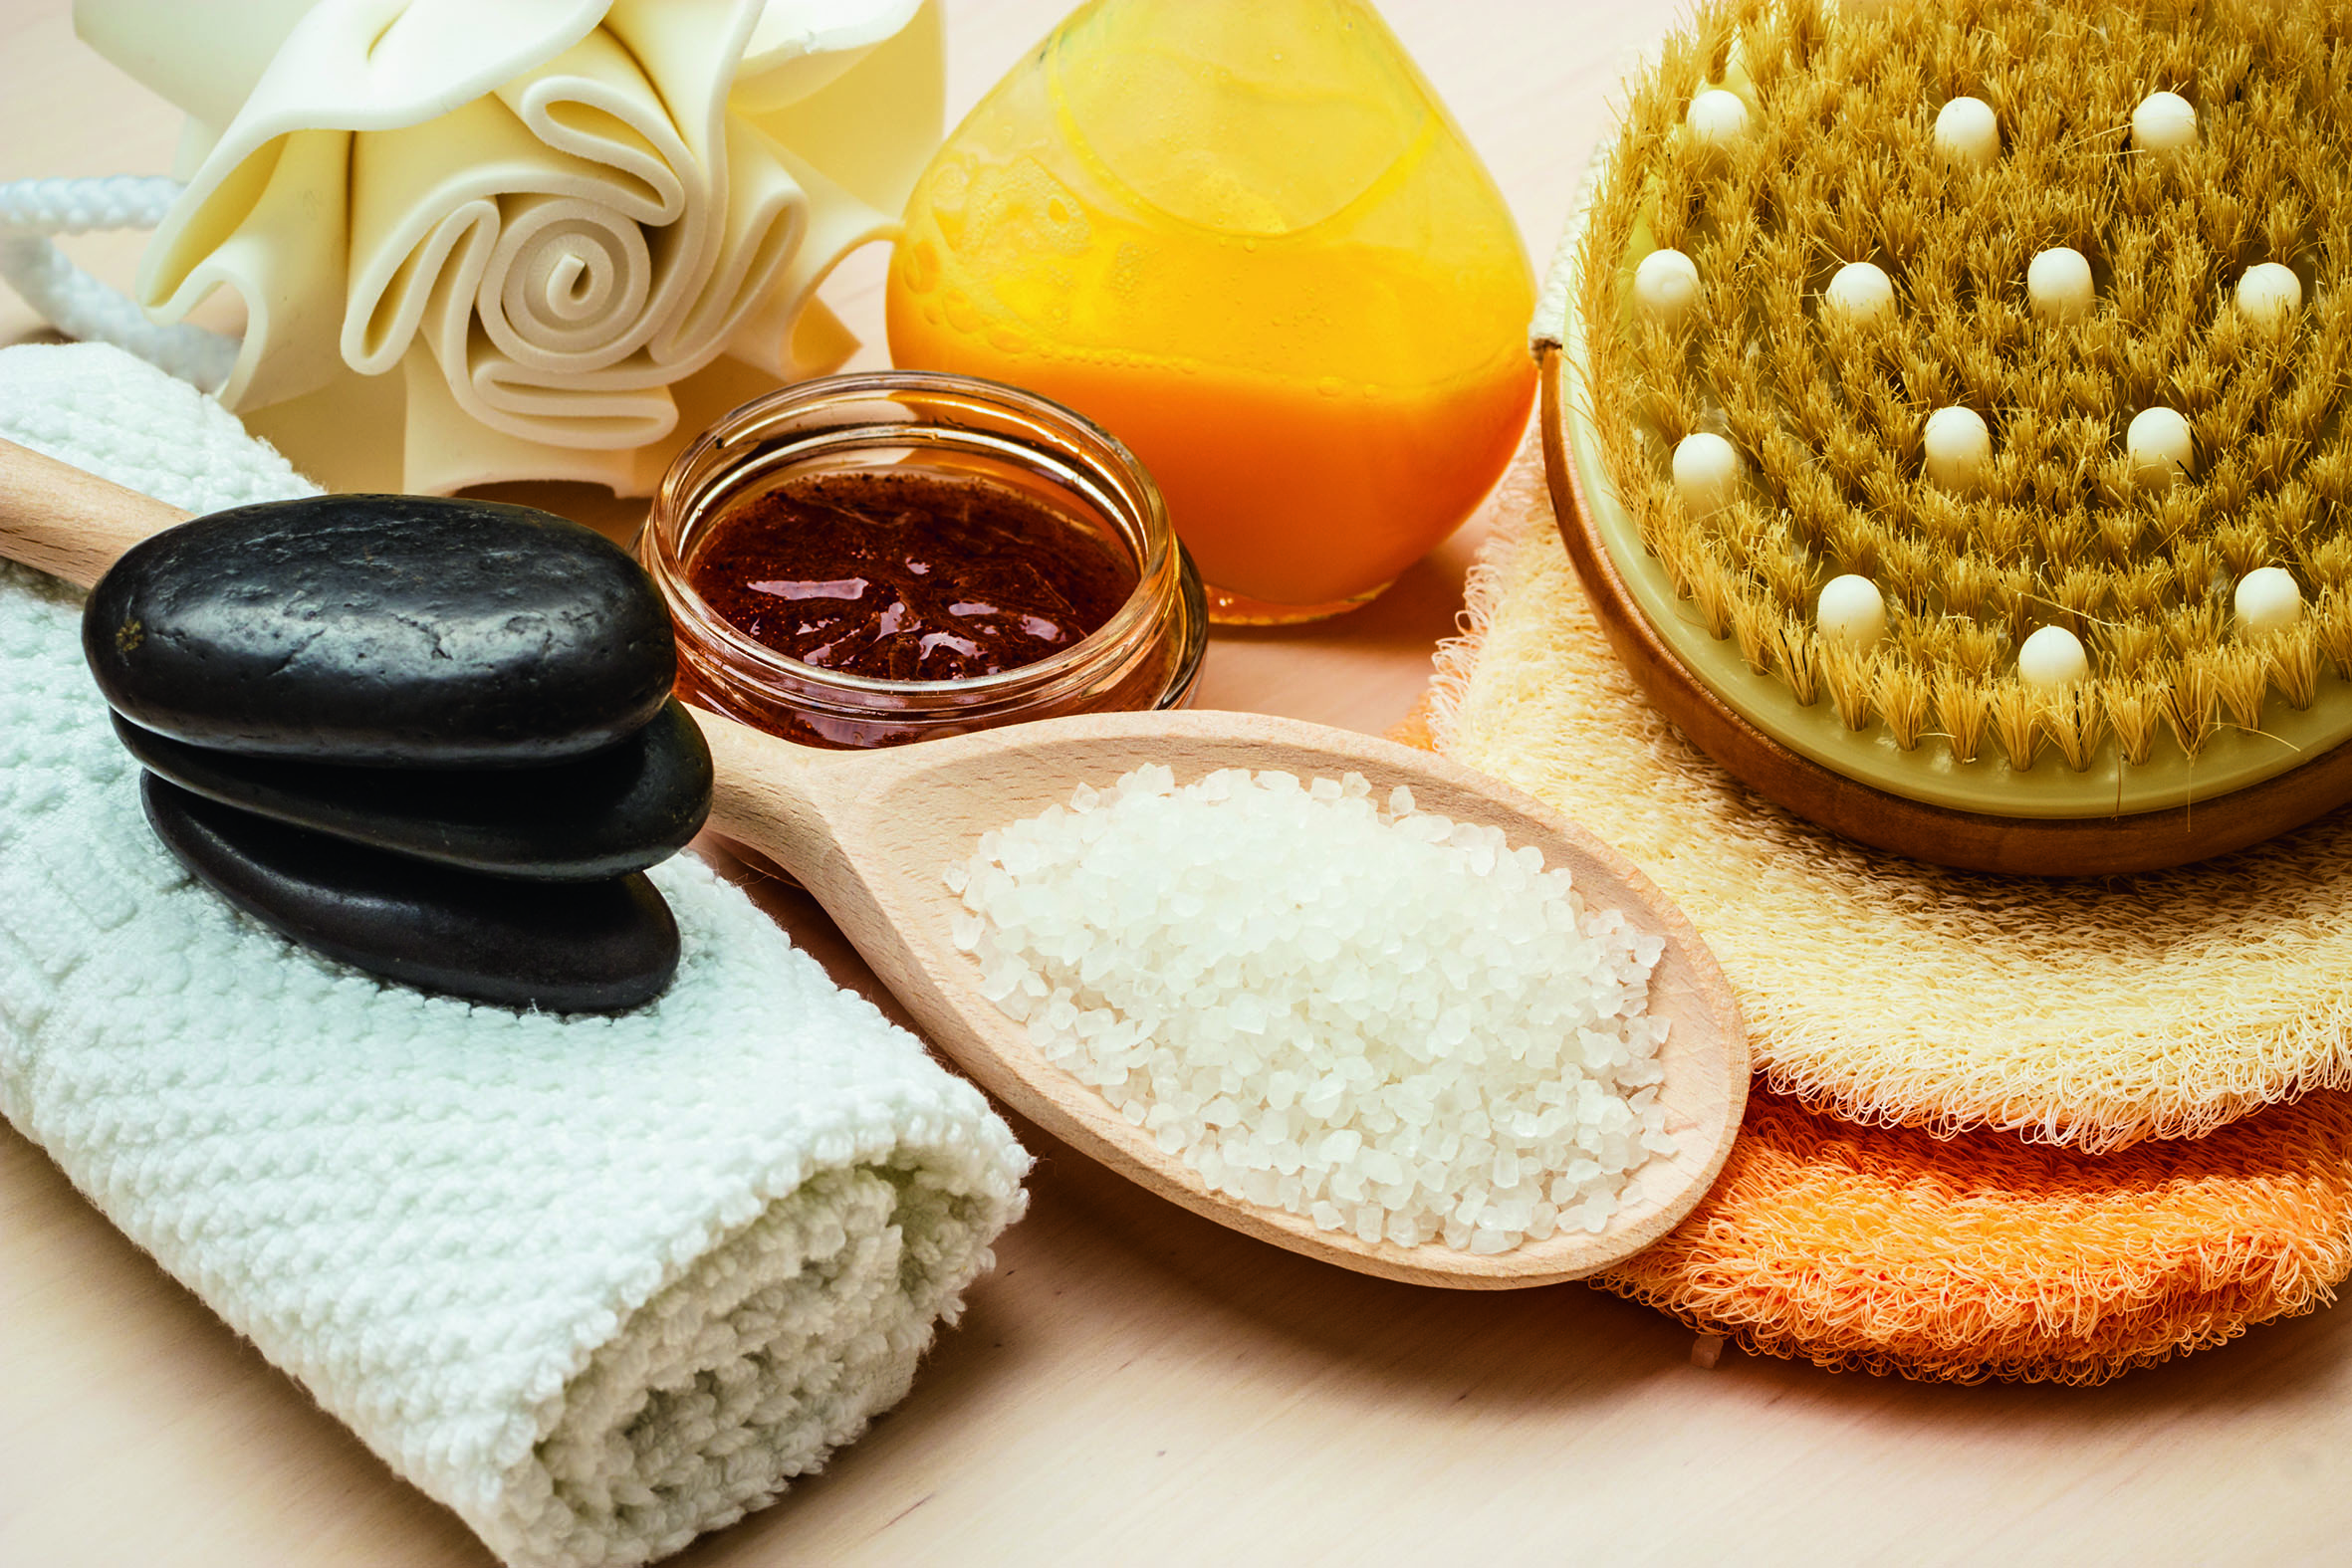 Spa formulations for rebooting rituals